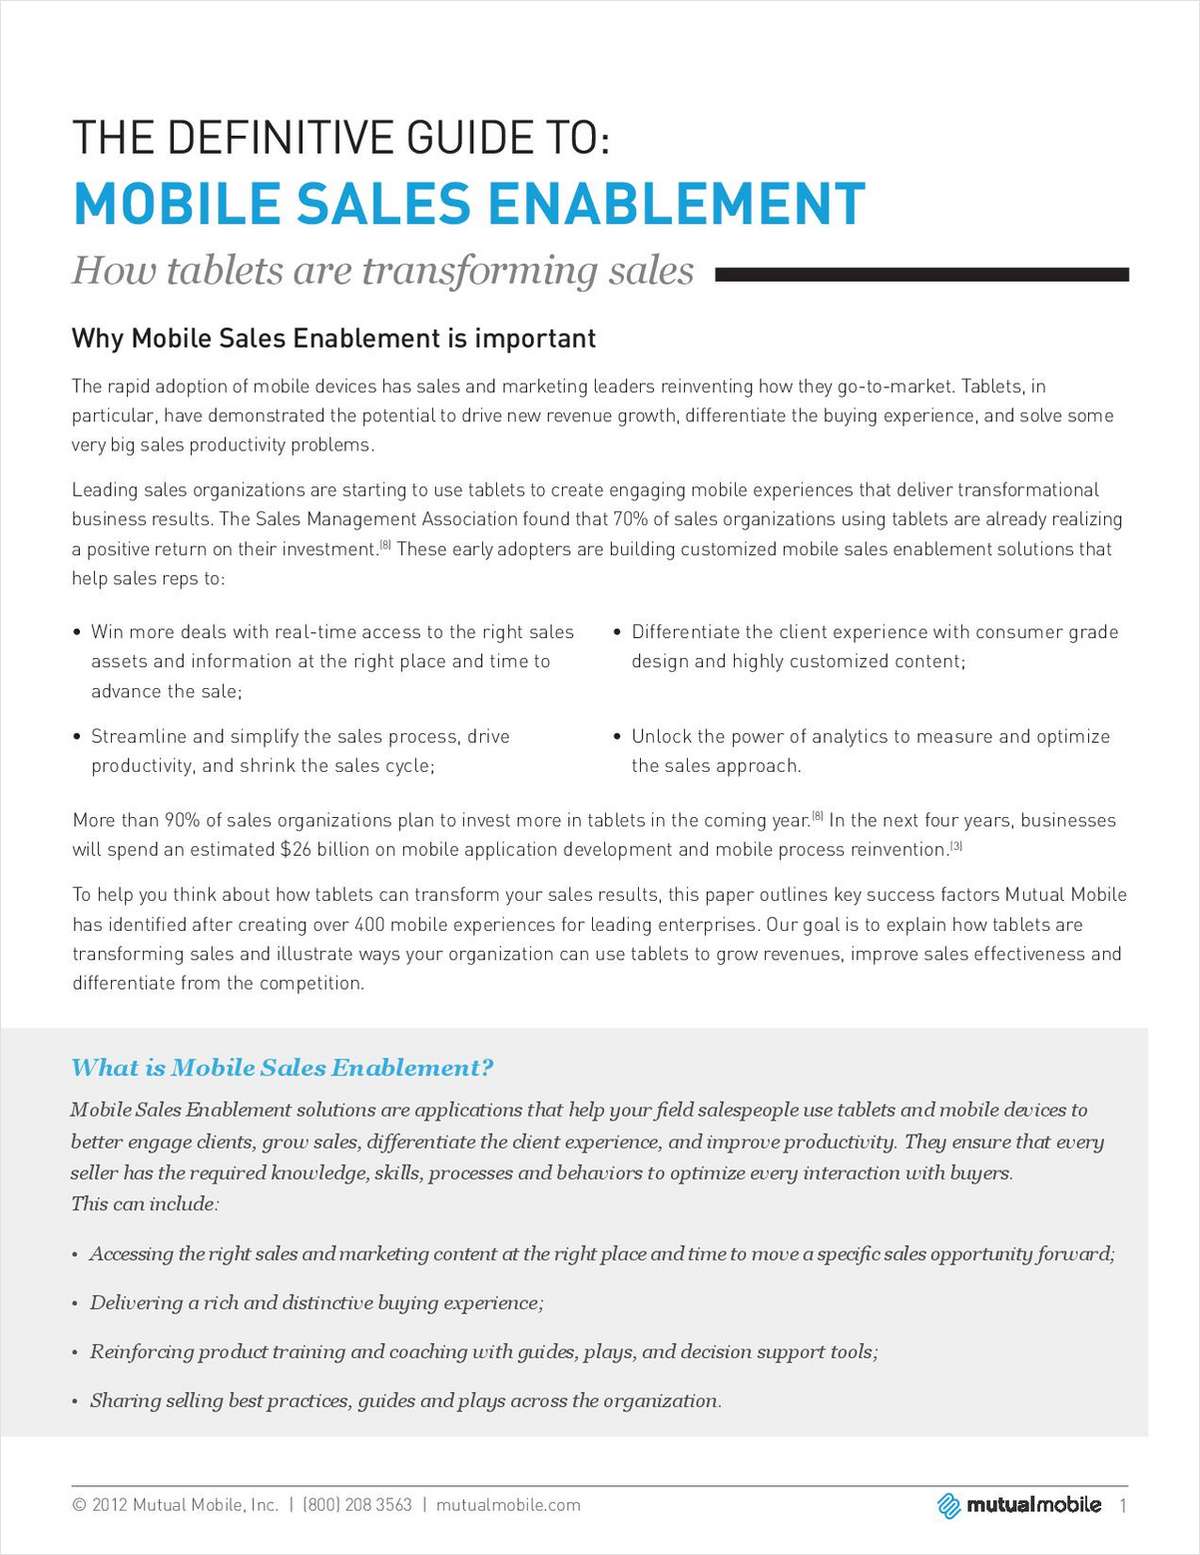 The Definitive Guide to Mobile Sales Enablement